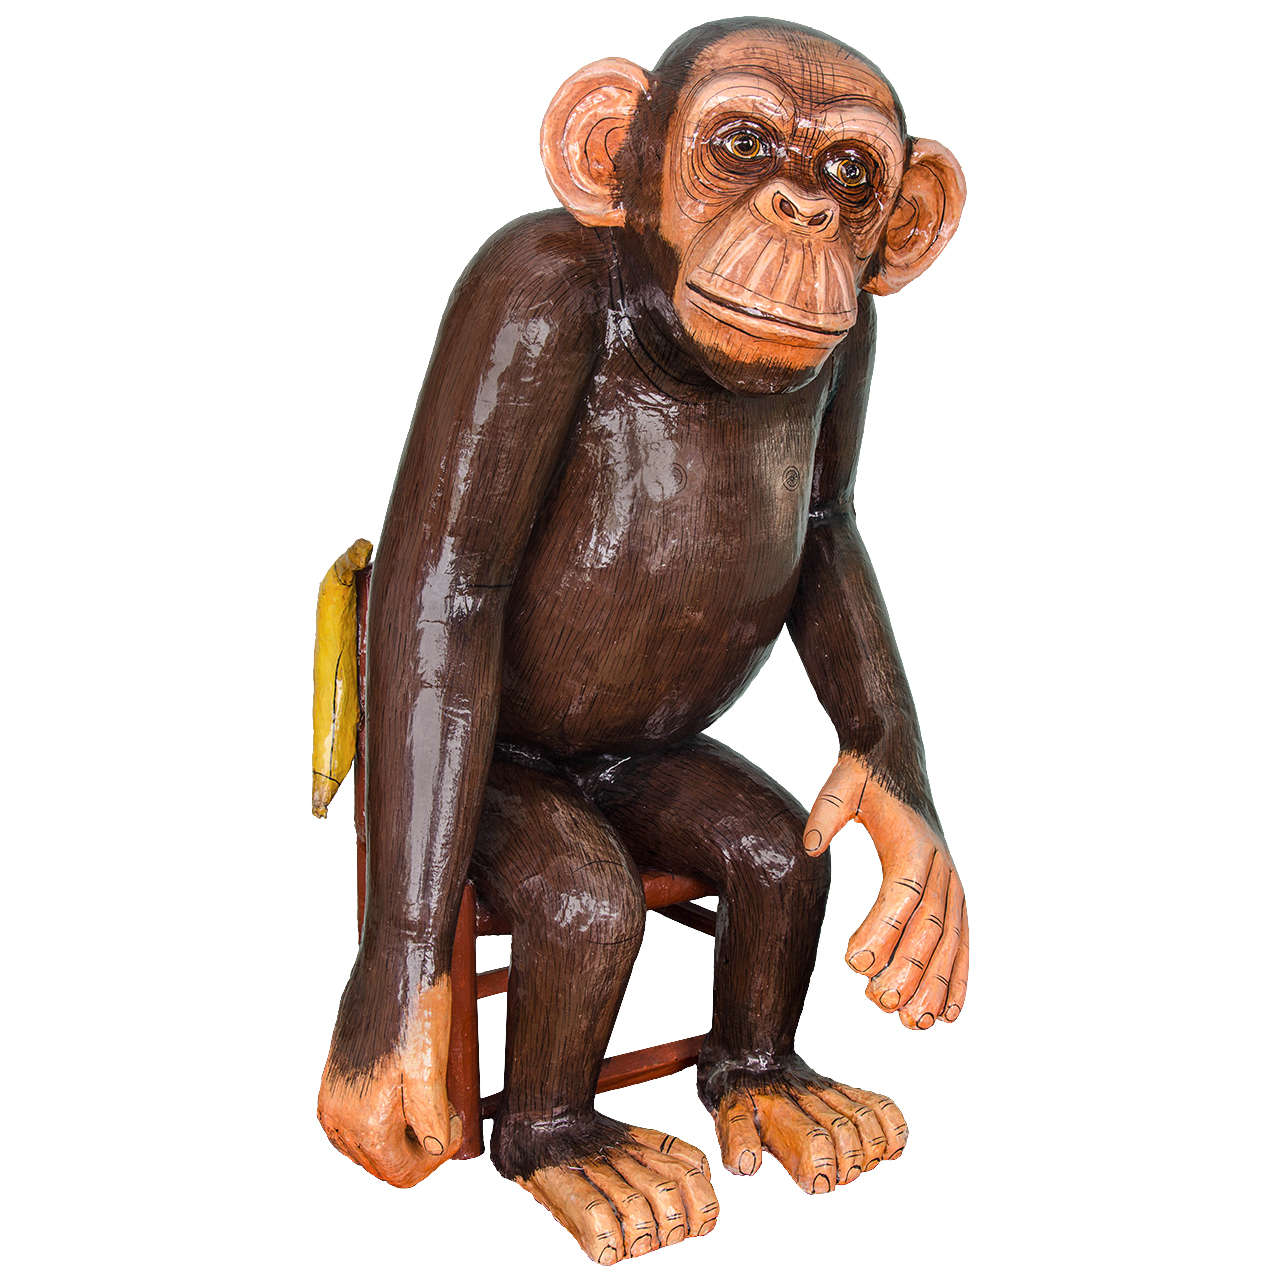 Lifesize Paper Mache Sculpture of a Seated Monkey by Sergio Bustamante